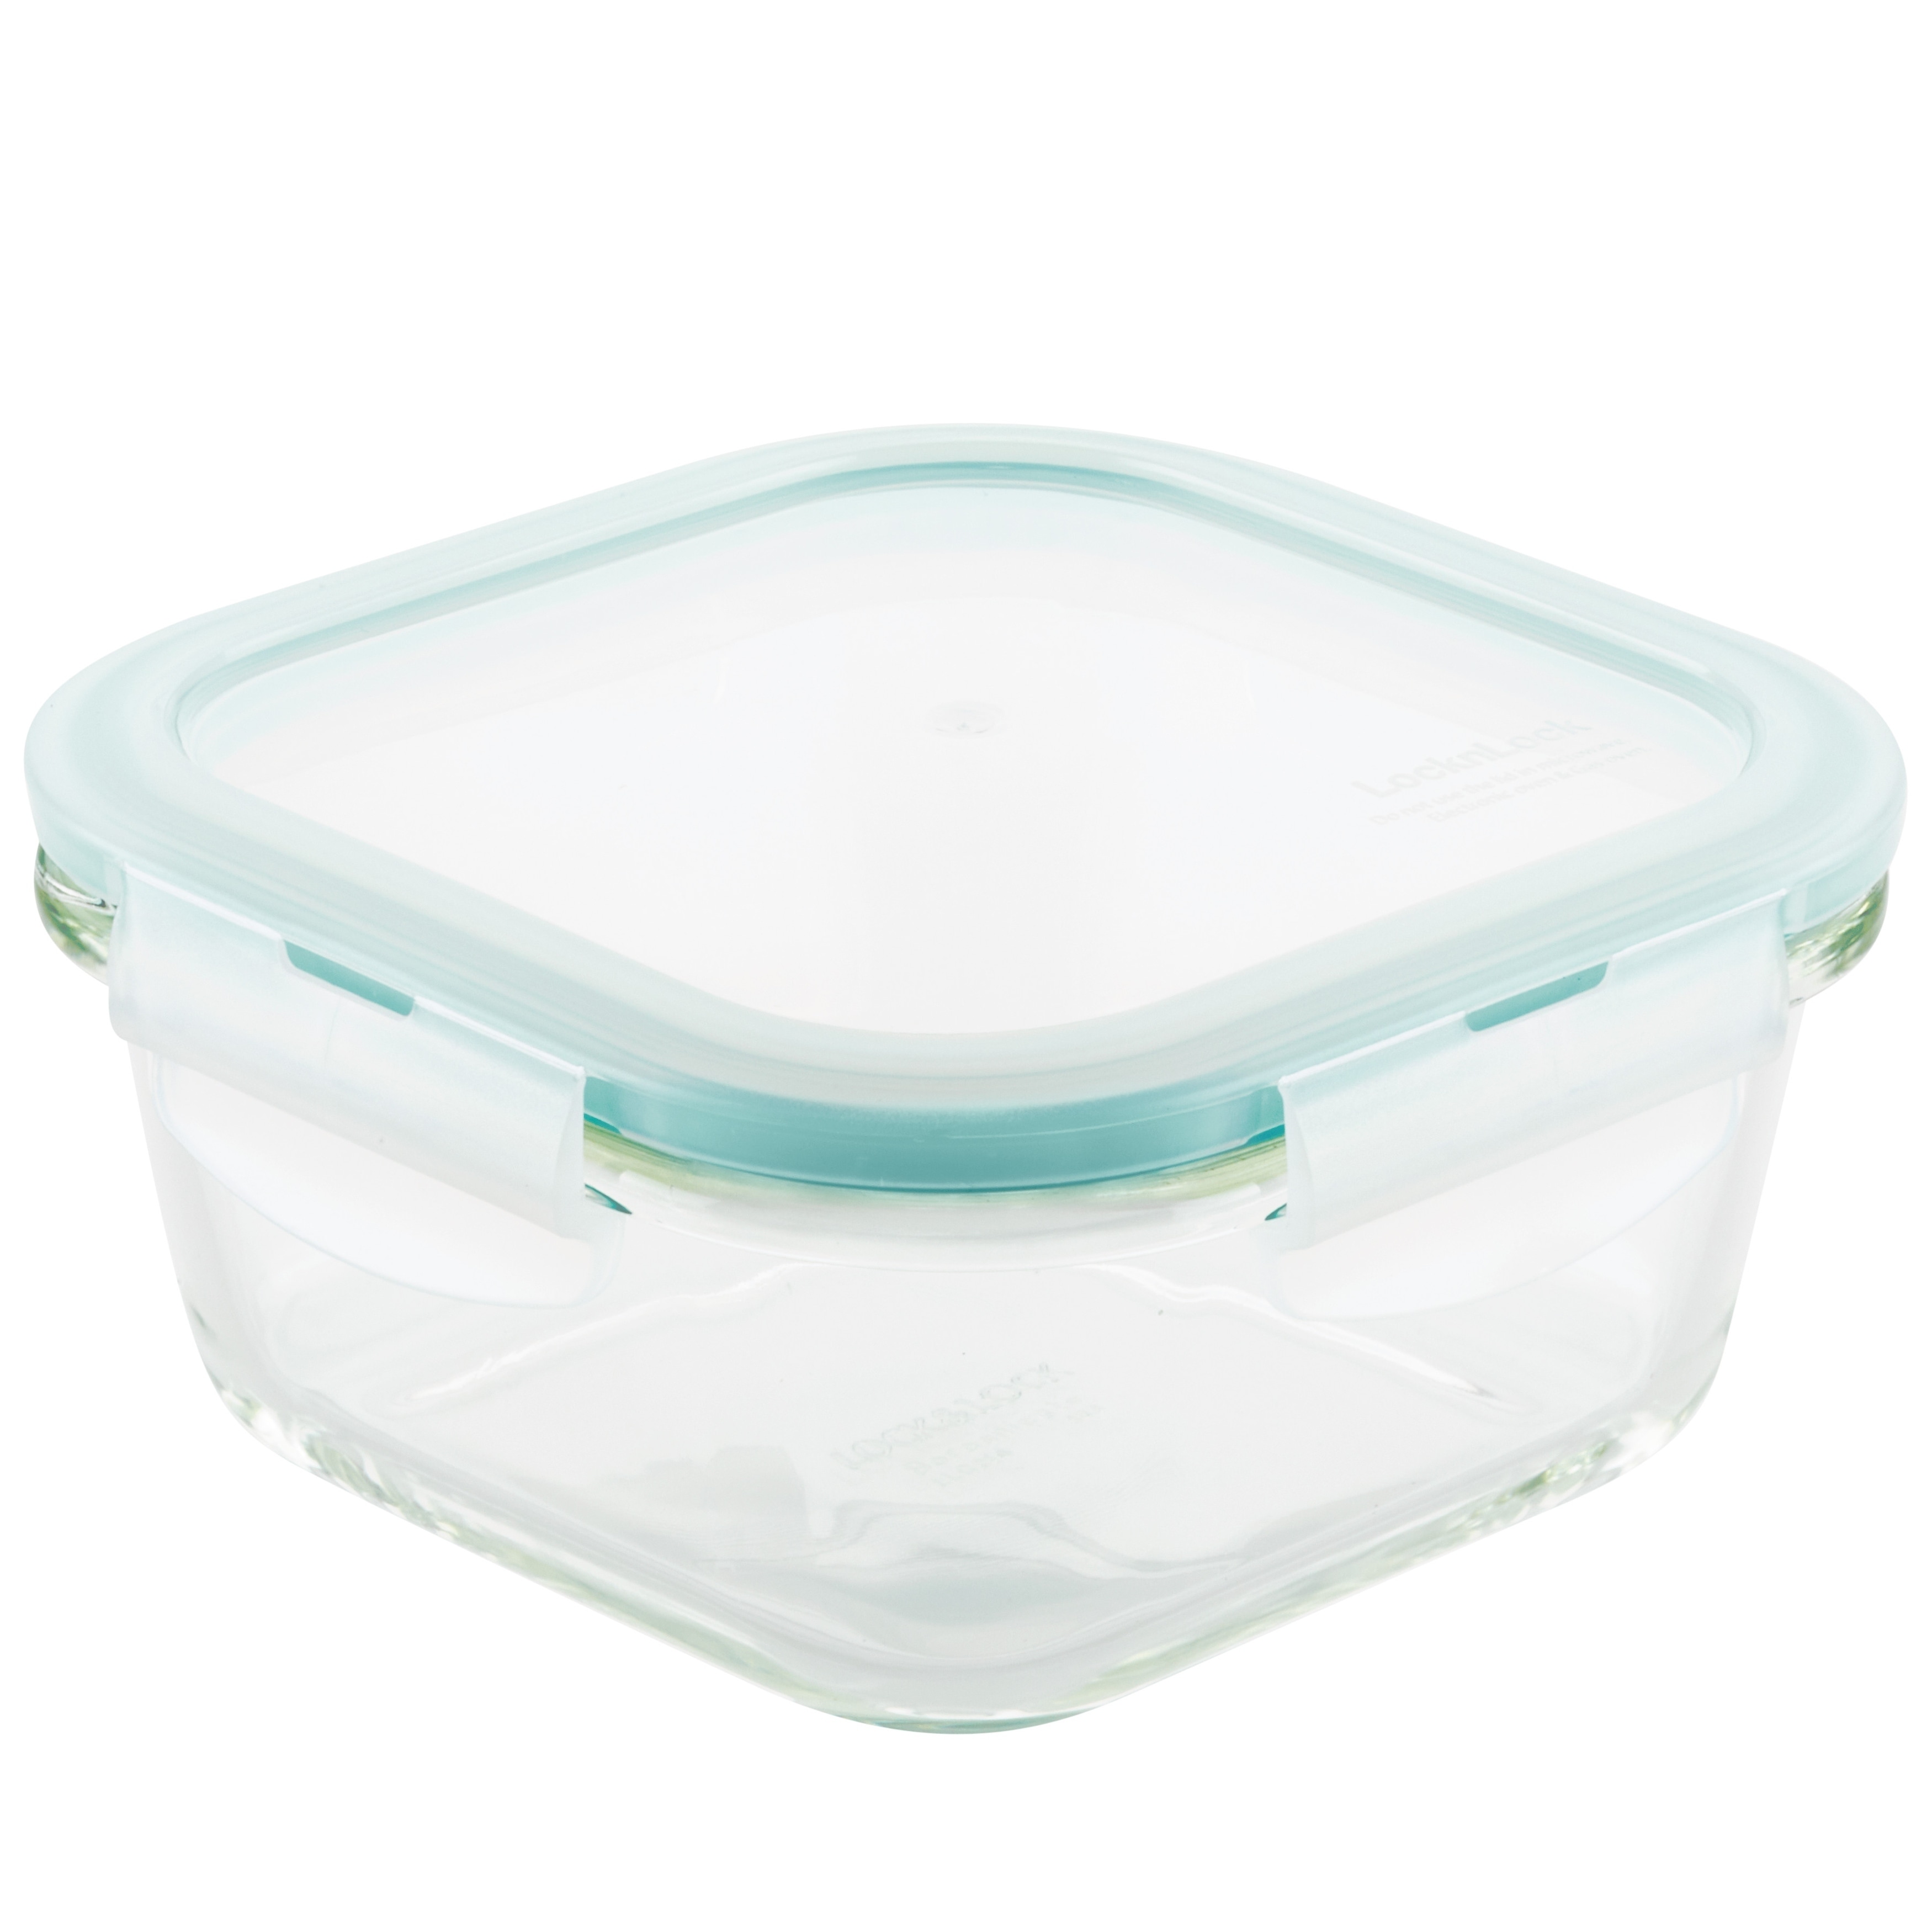 Lock & Lock LLG214T 17 oz Purely Better Vented Glass Food Storage Container,  Clear